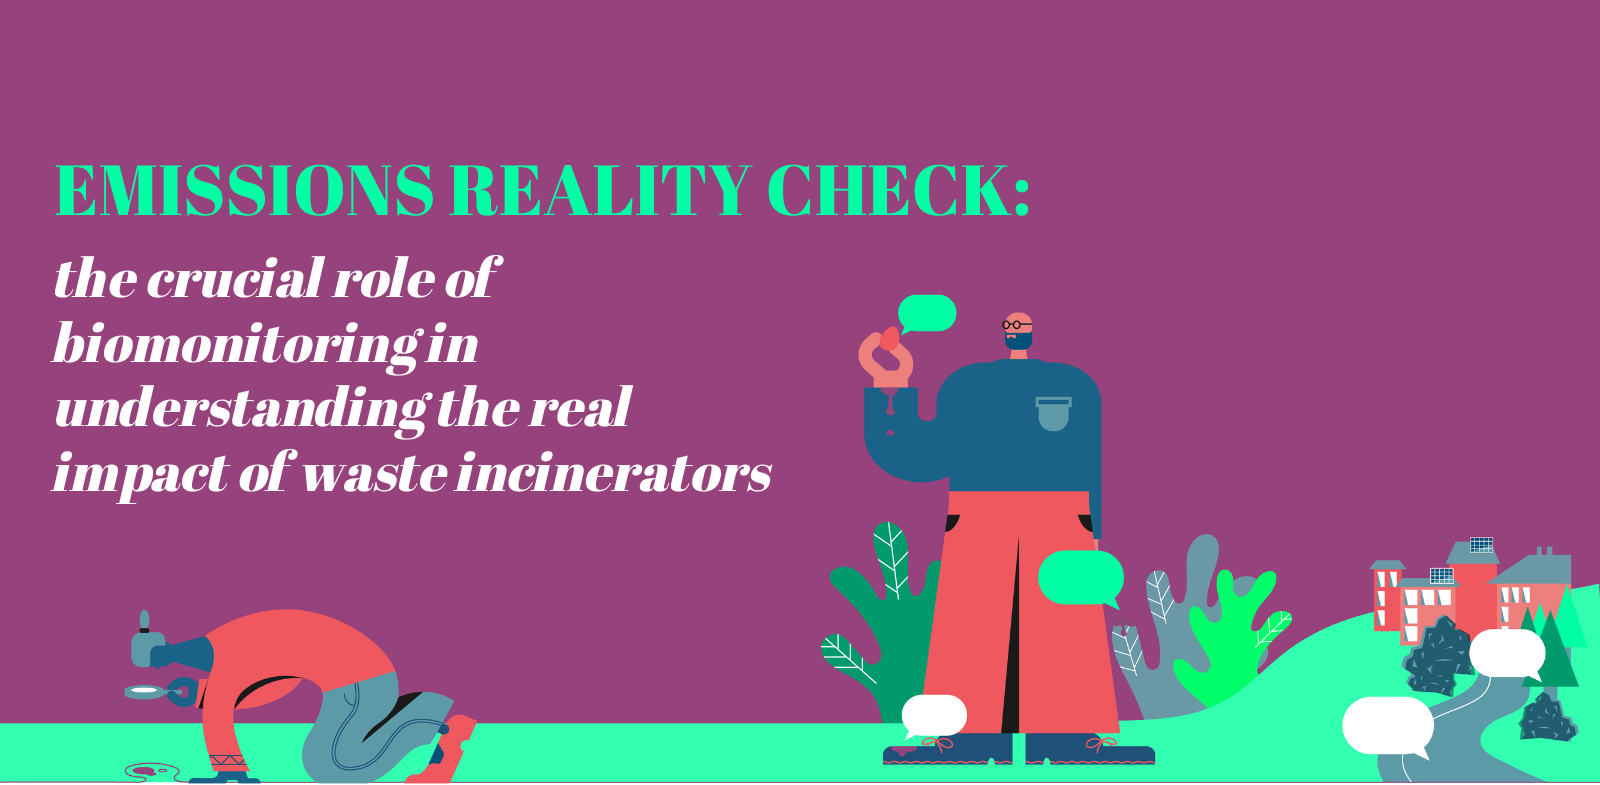 Emissions reality check: the crucial role of biomonitoring in understanding the real impact of waste incinerators